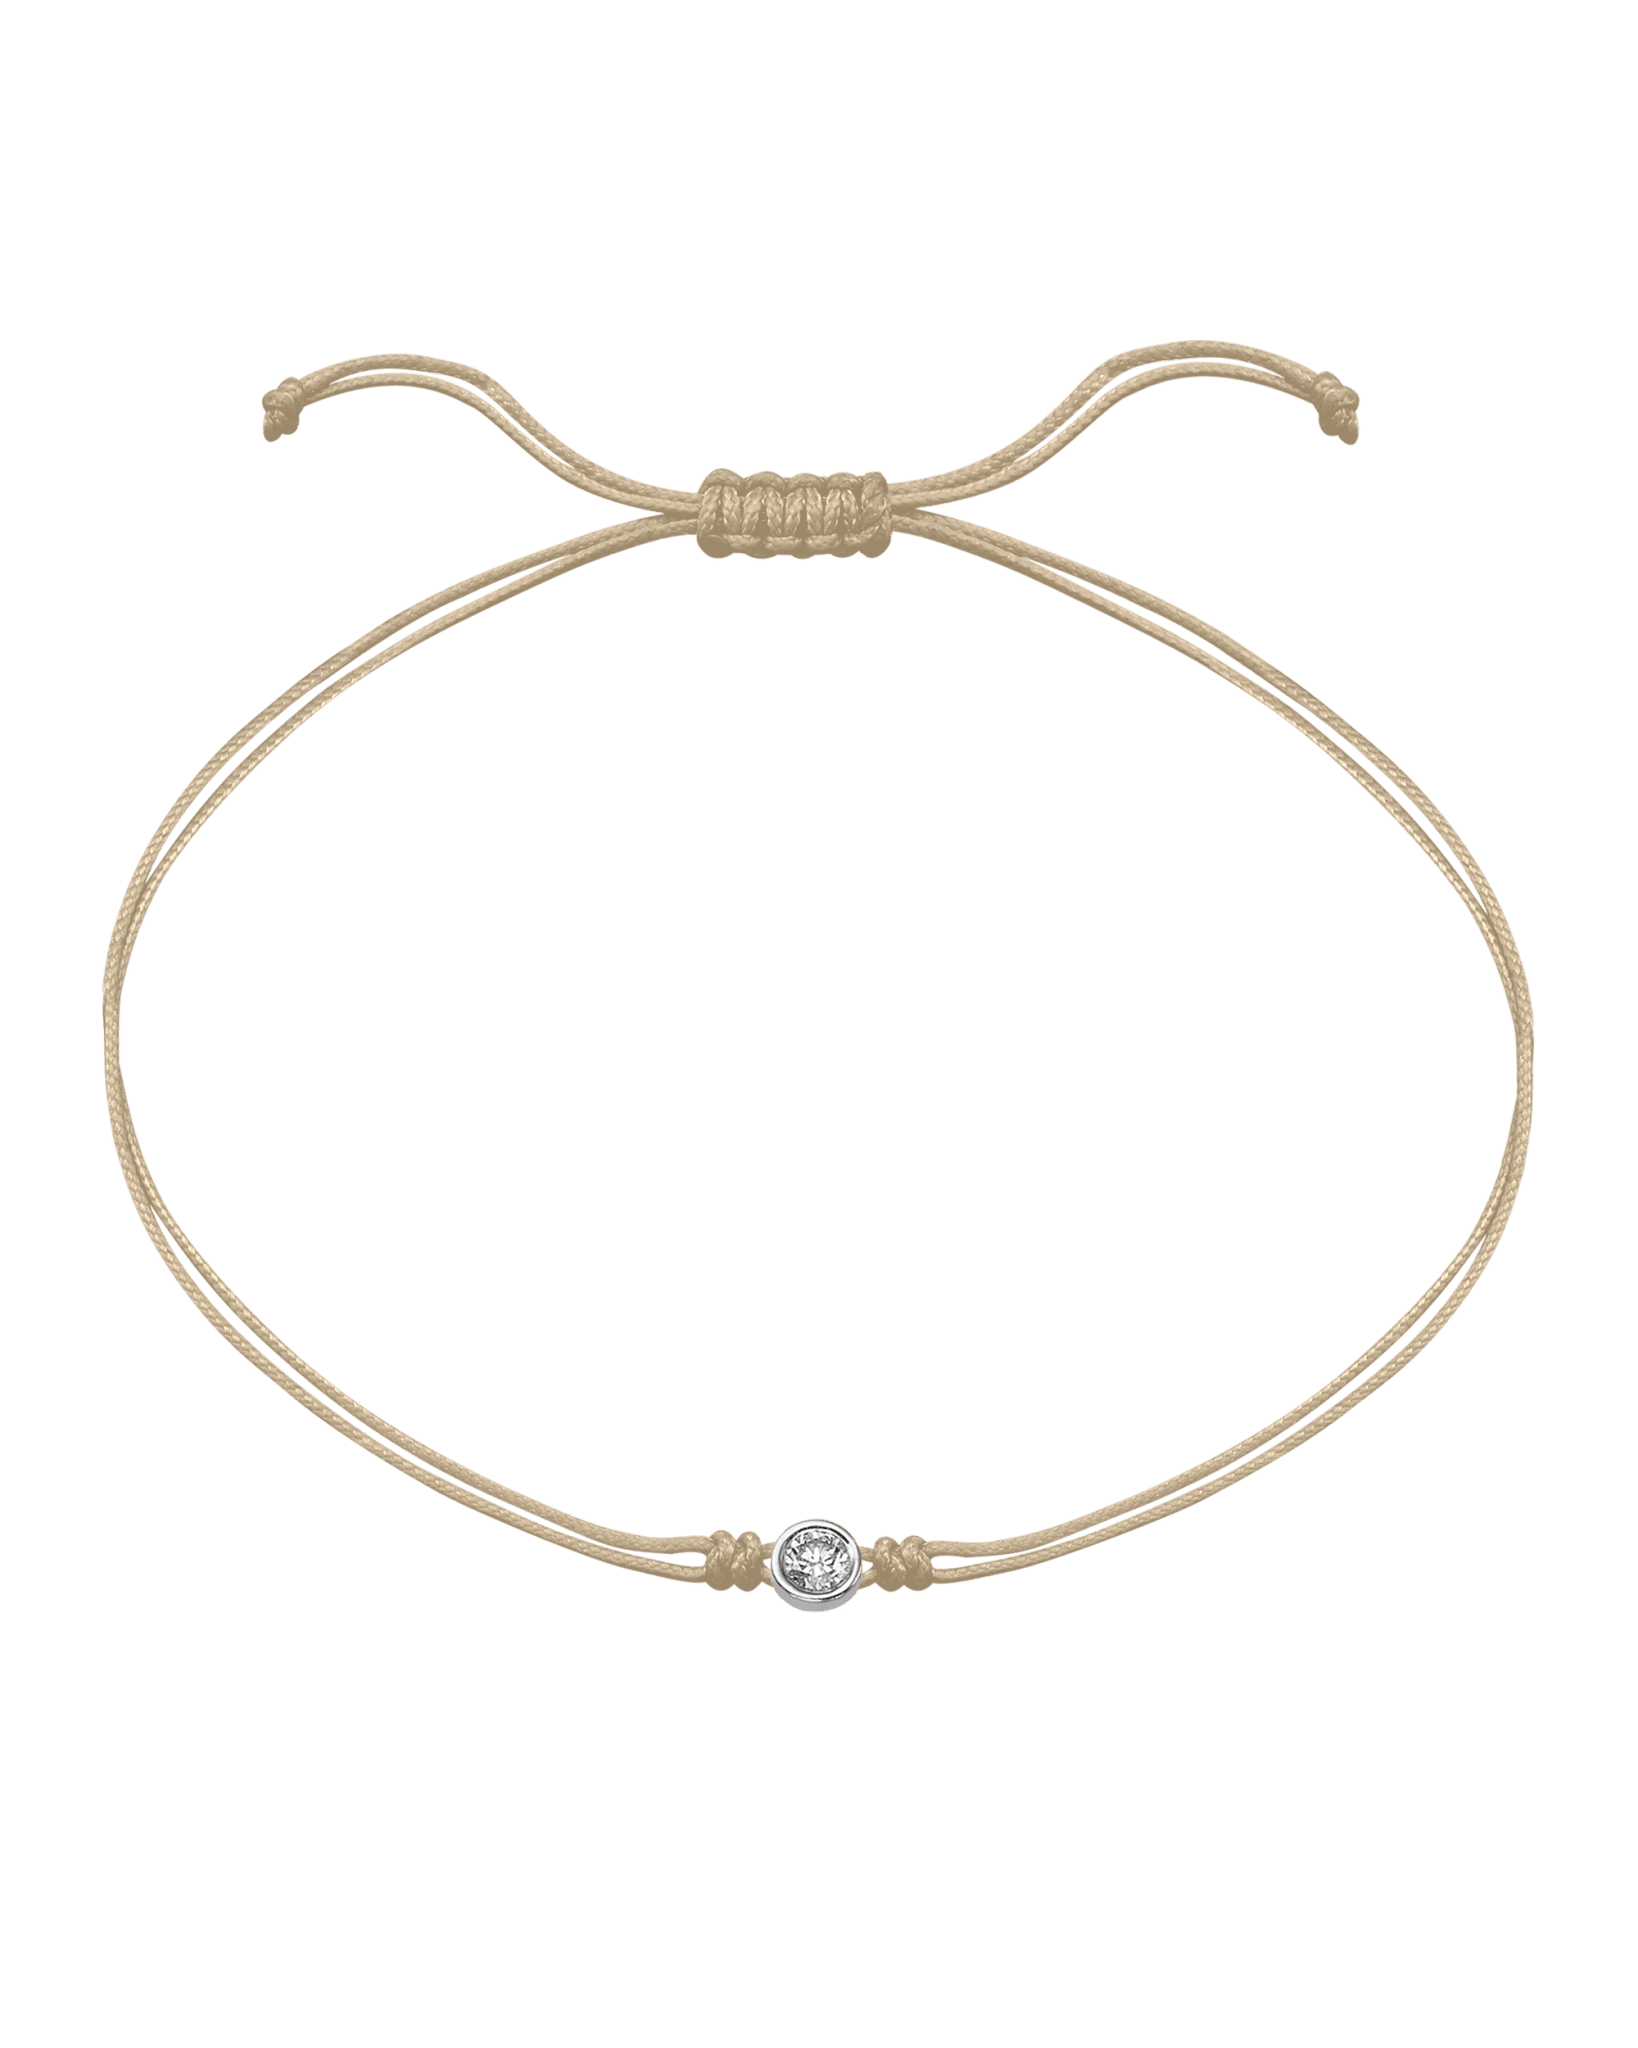 The Classic String of Love - 14K White Gold Bracelets 14K Solid Gold Beige Large: 0.1ct 